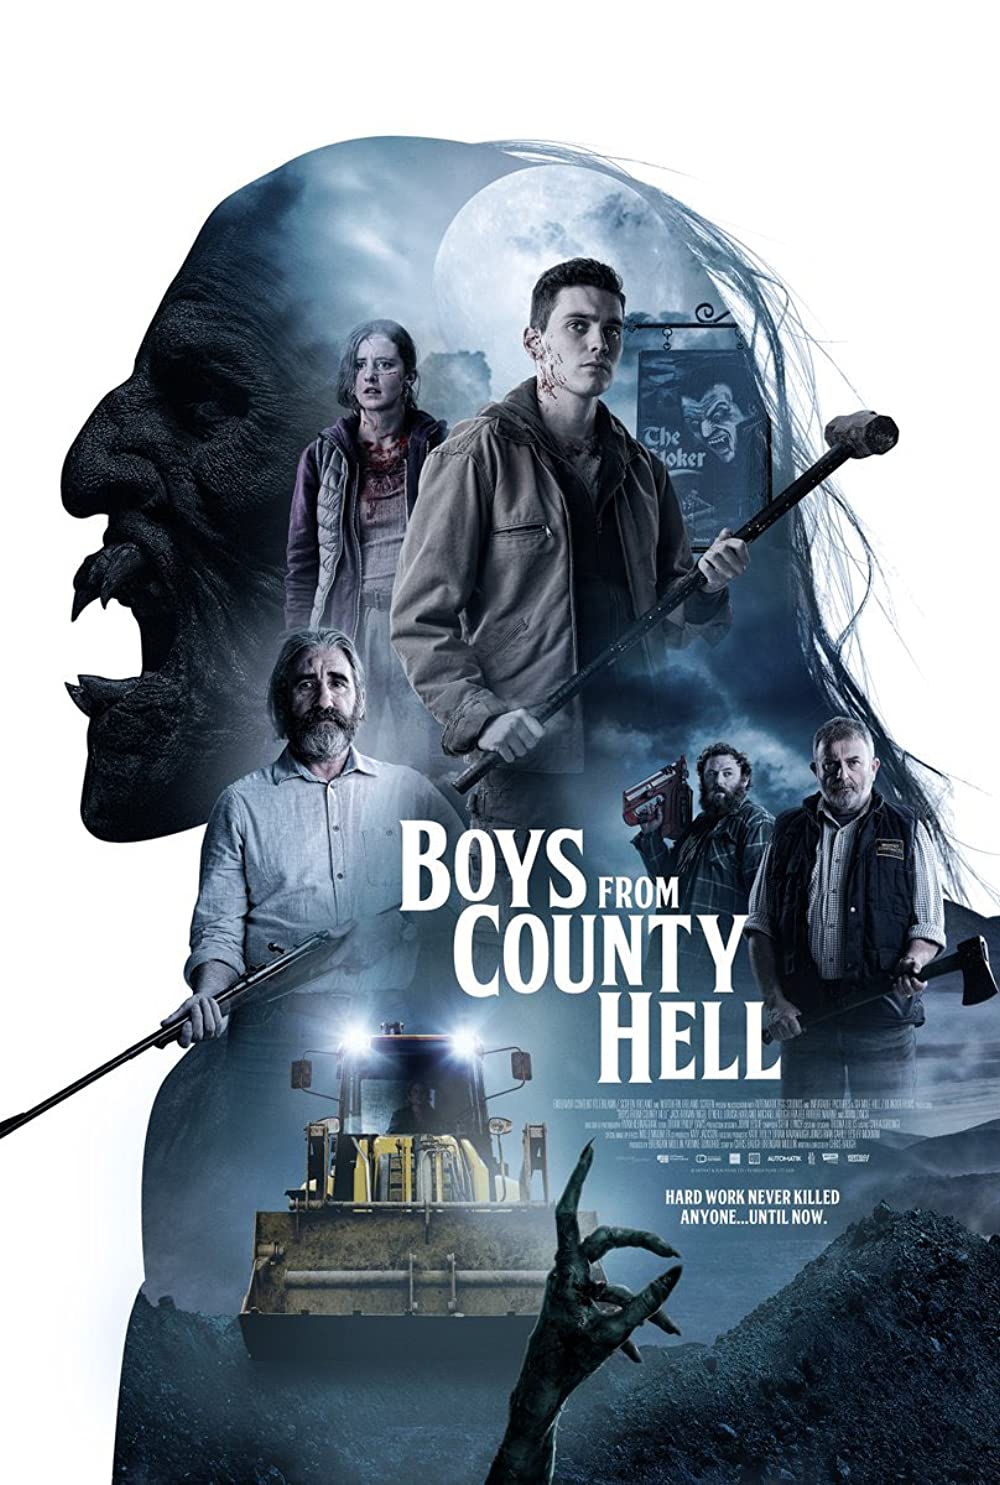 BoYS FROM COUNTY HELL Subtitles [English SRT]